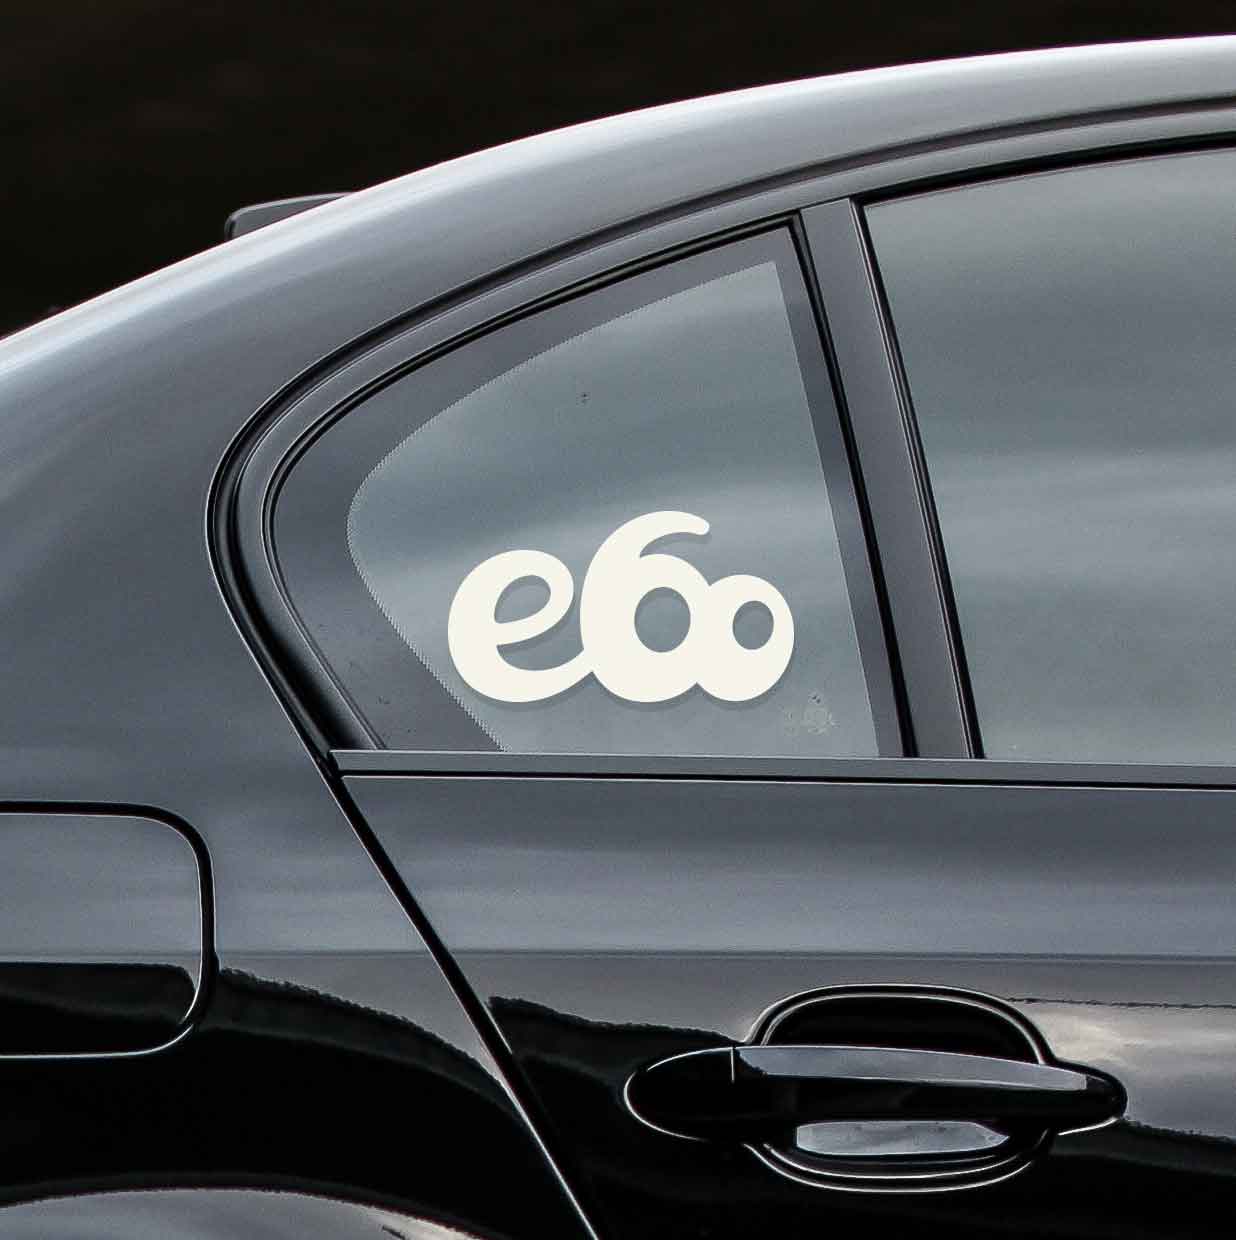 Sticker for BMW e60. Available in different colors. Contour cut from premium outdoor vinyls. Never fades out.